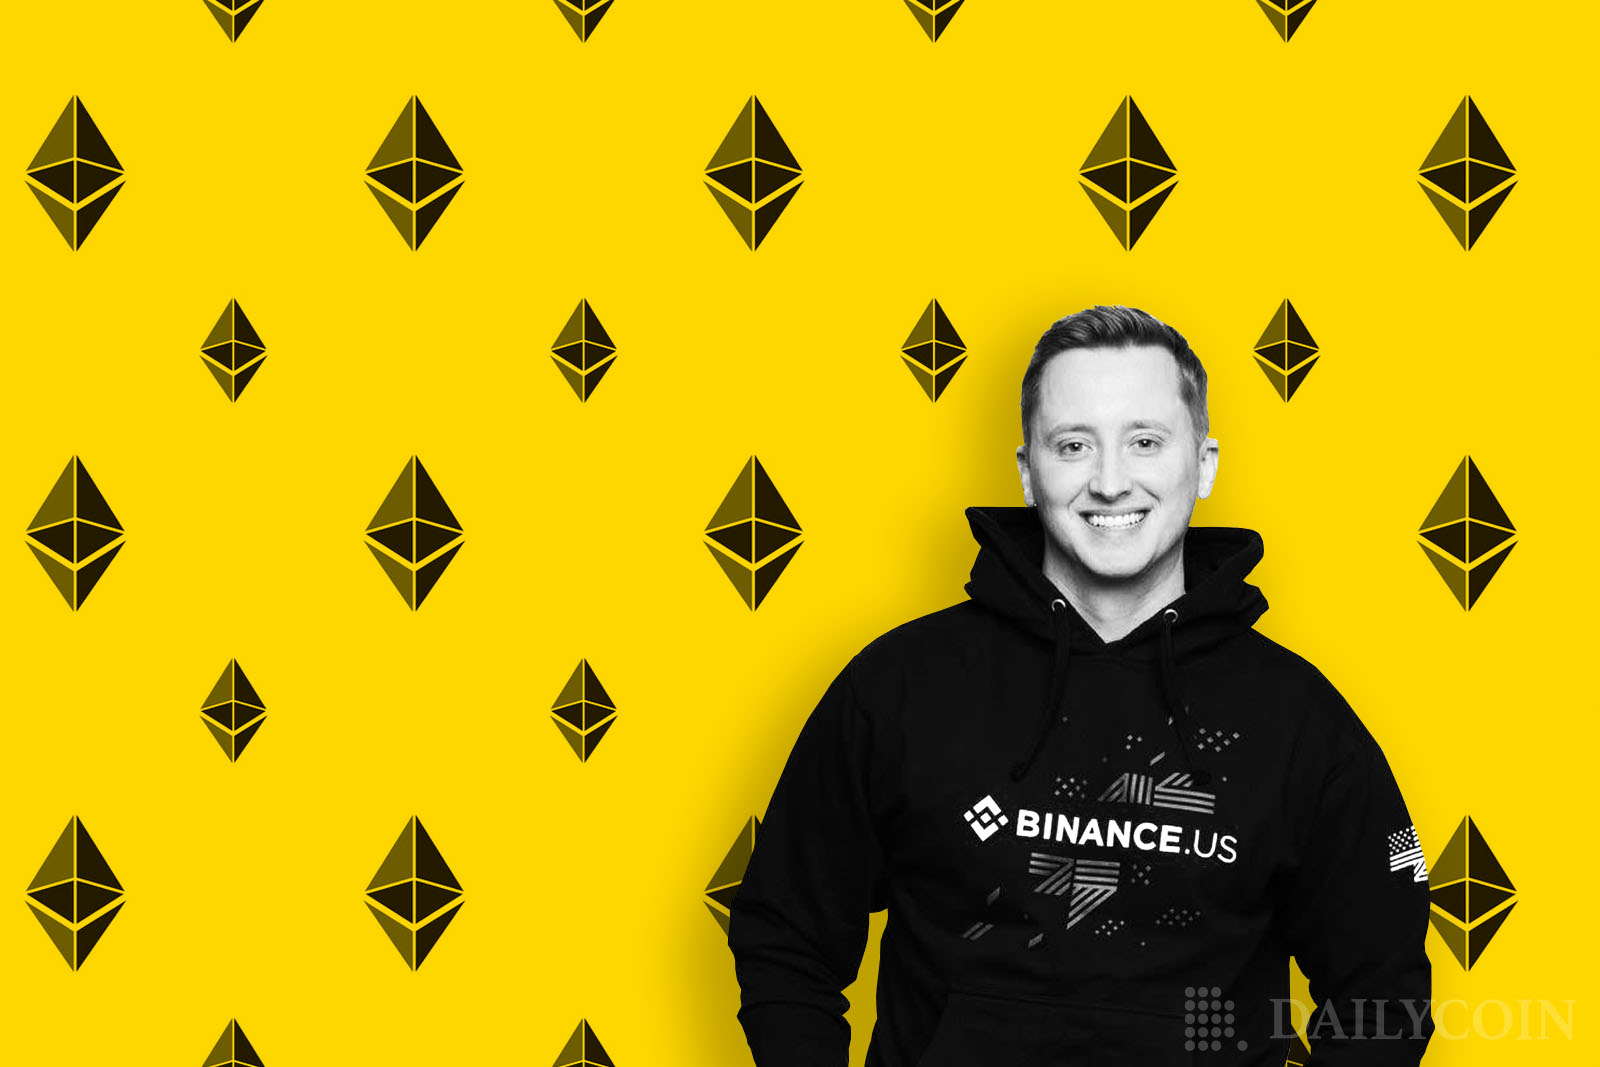 Binance.US Launches Ethereum Staking Days Before The Merge